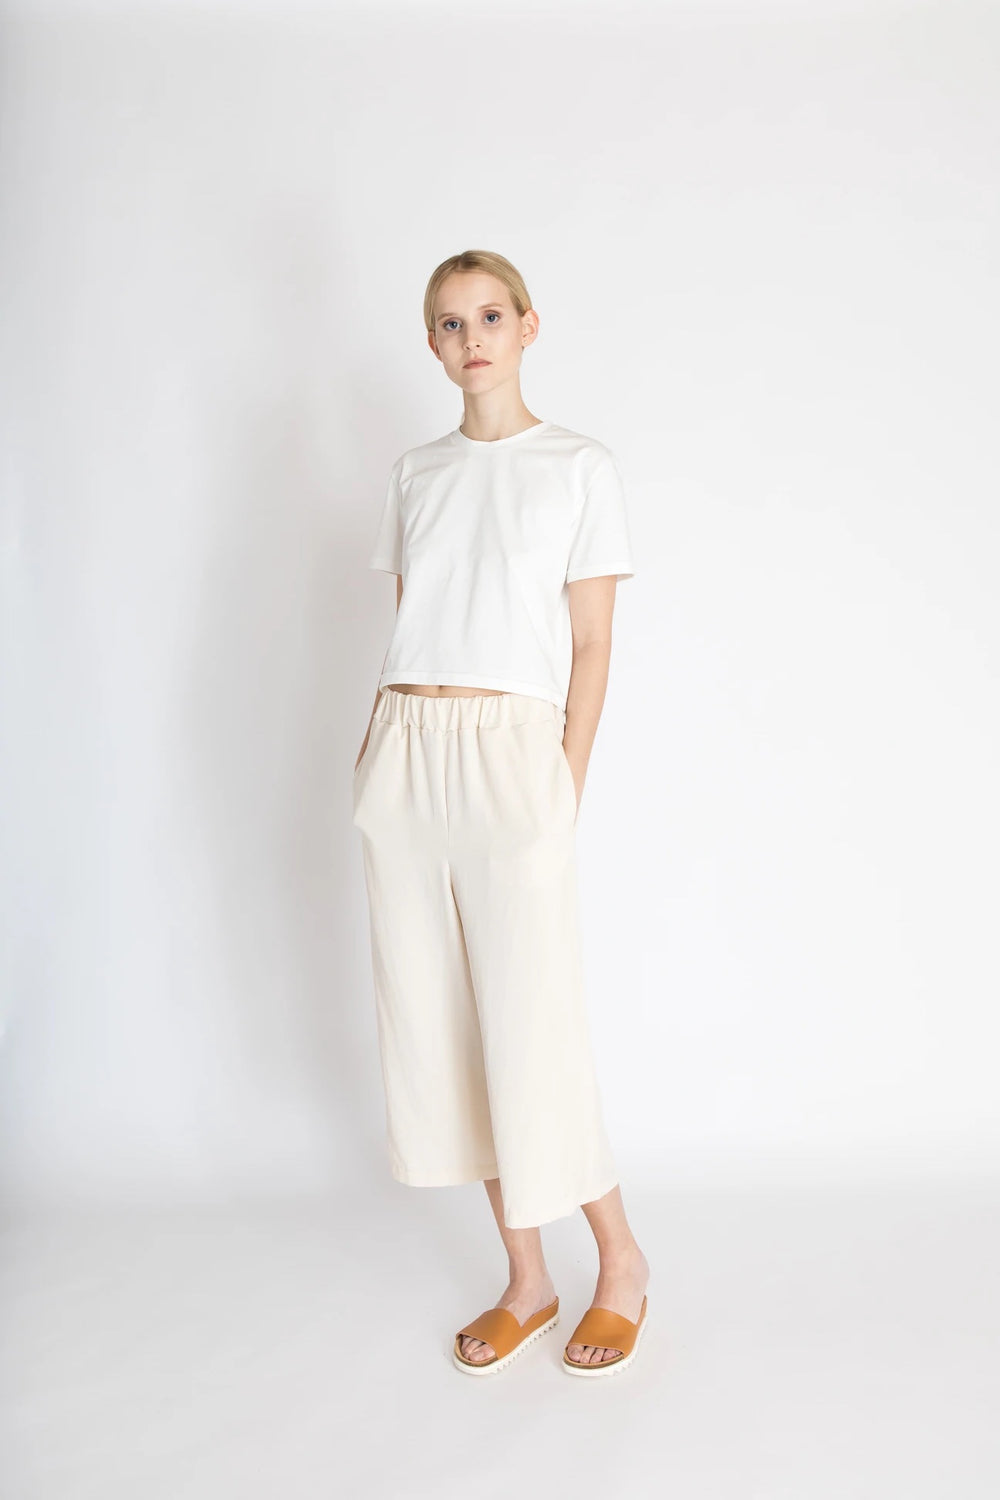 Woman wearing the Nova Pants sewing pattern from Bara Studio on The Fold Line. A culottes pattern made in cotton, linen or tencel fabrics, featuring wide legs, relaxed fit, elasticated waist, back patch pocket, in-seam pockets, faux fly front and cropped 